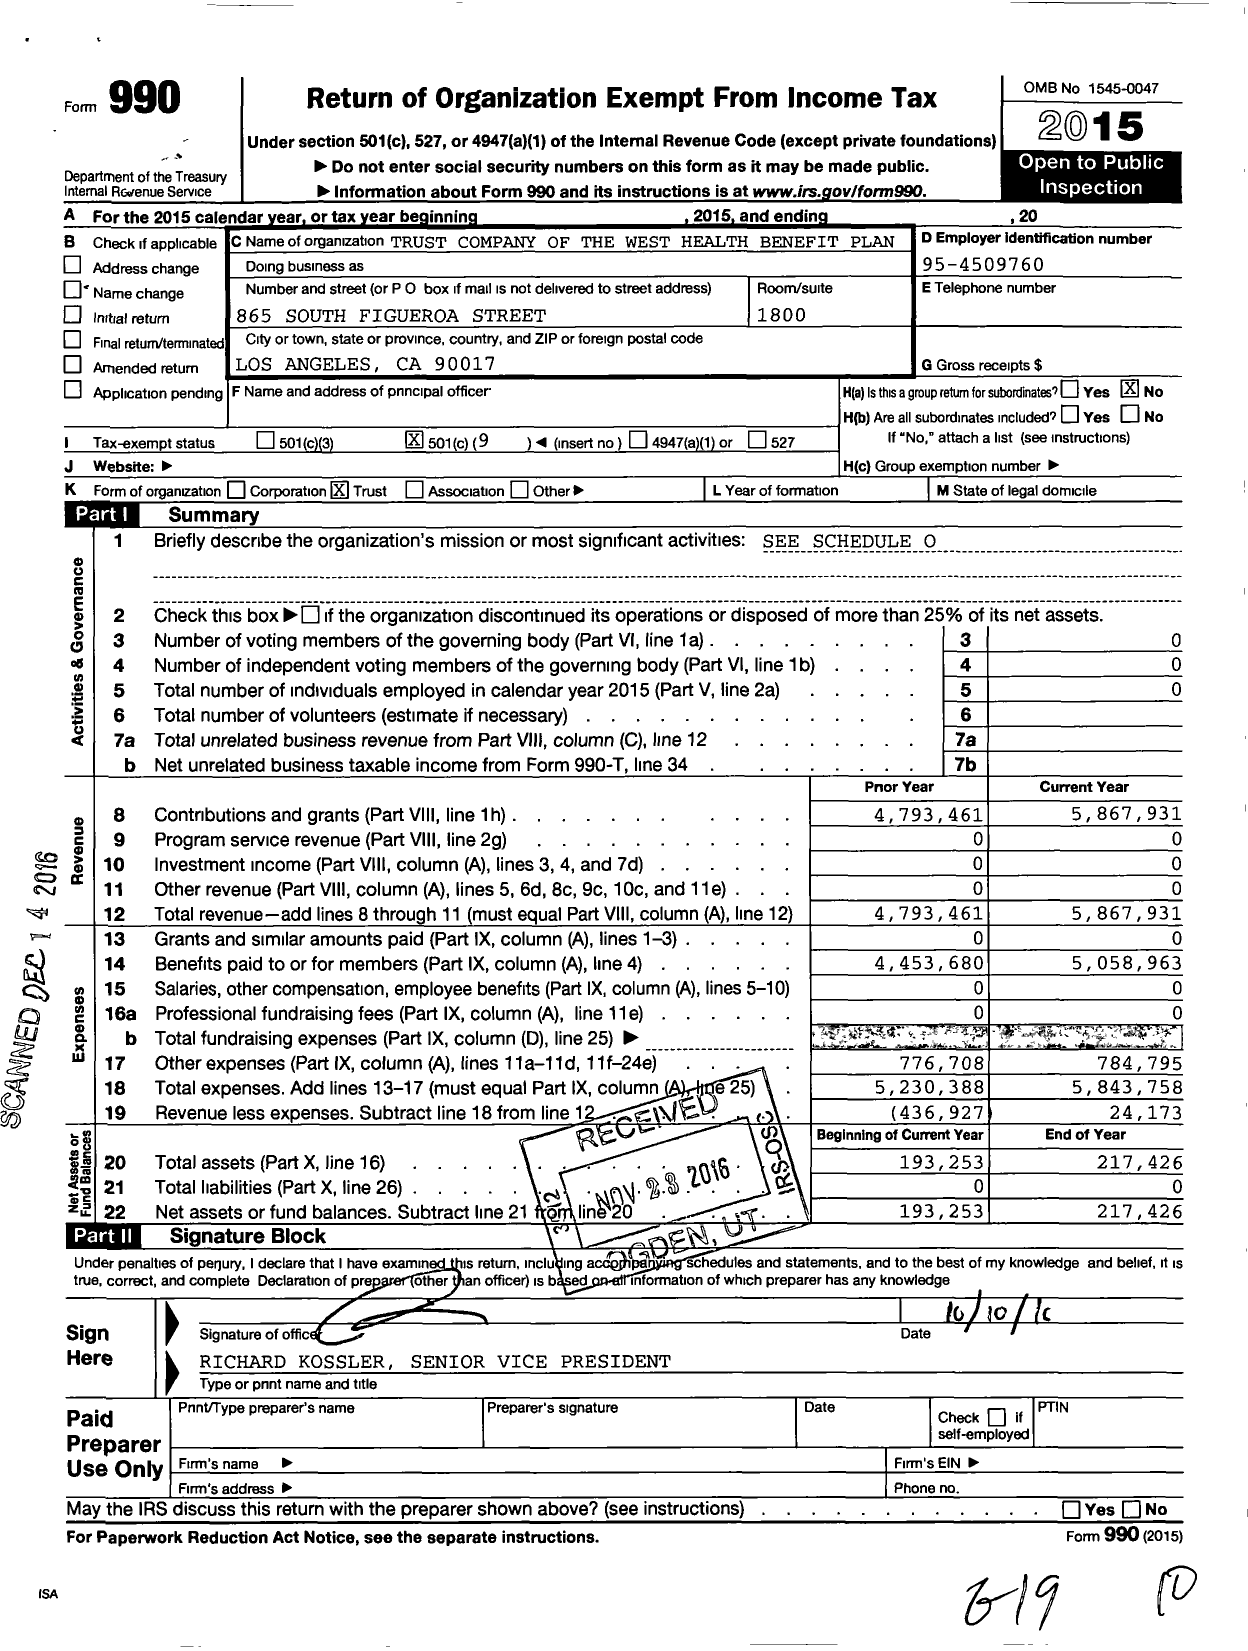 Image of first page of 2015 Form 990O for Trust Company of the West Health Benefit Plan